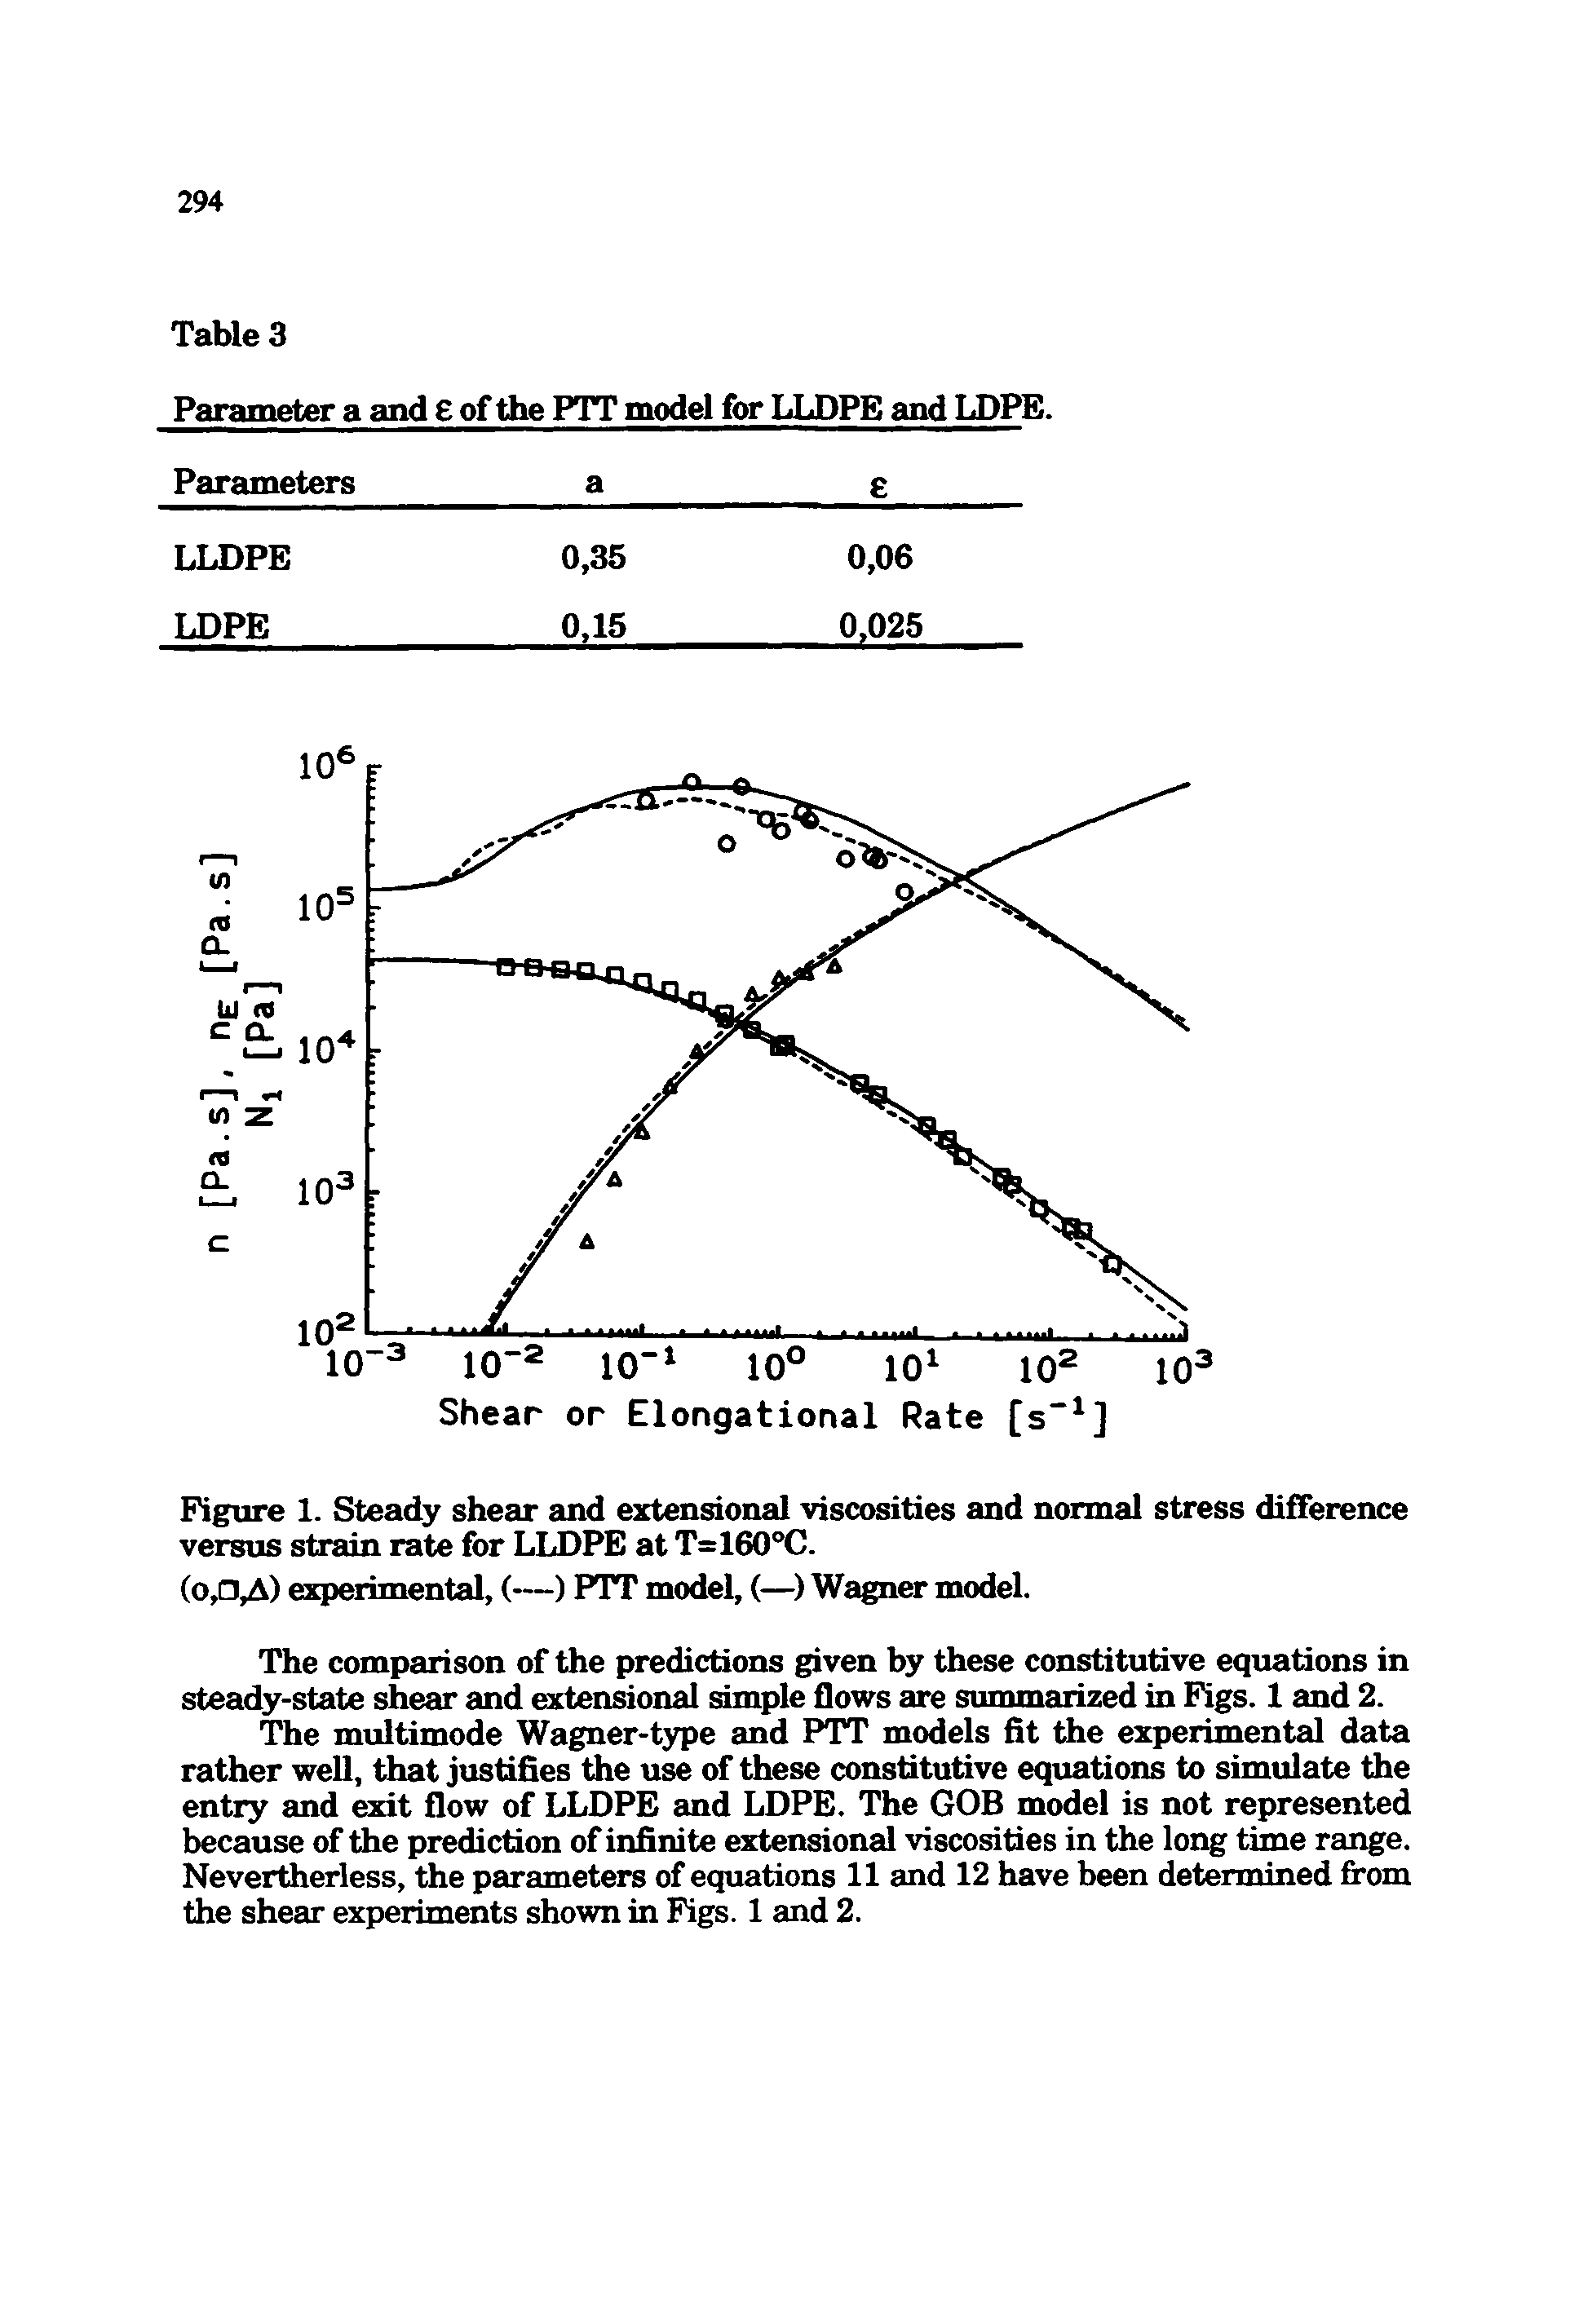 Figure 1. Steady shear and extensional viscosities and normal stress difference versus strain rate for LLDPE at T=160°C.